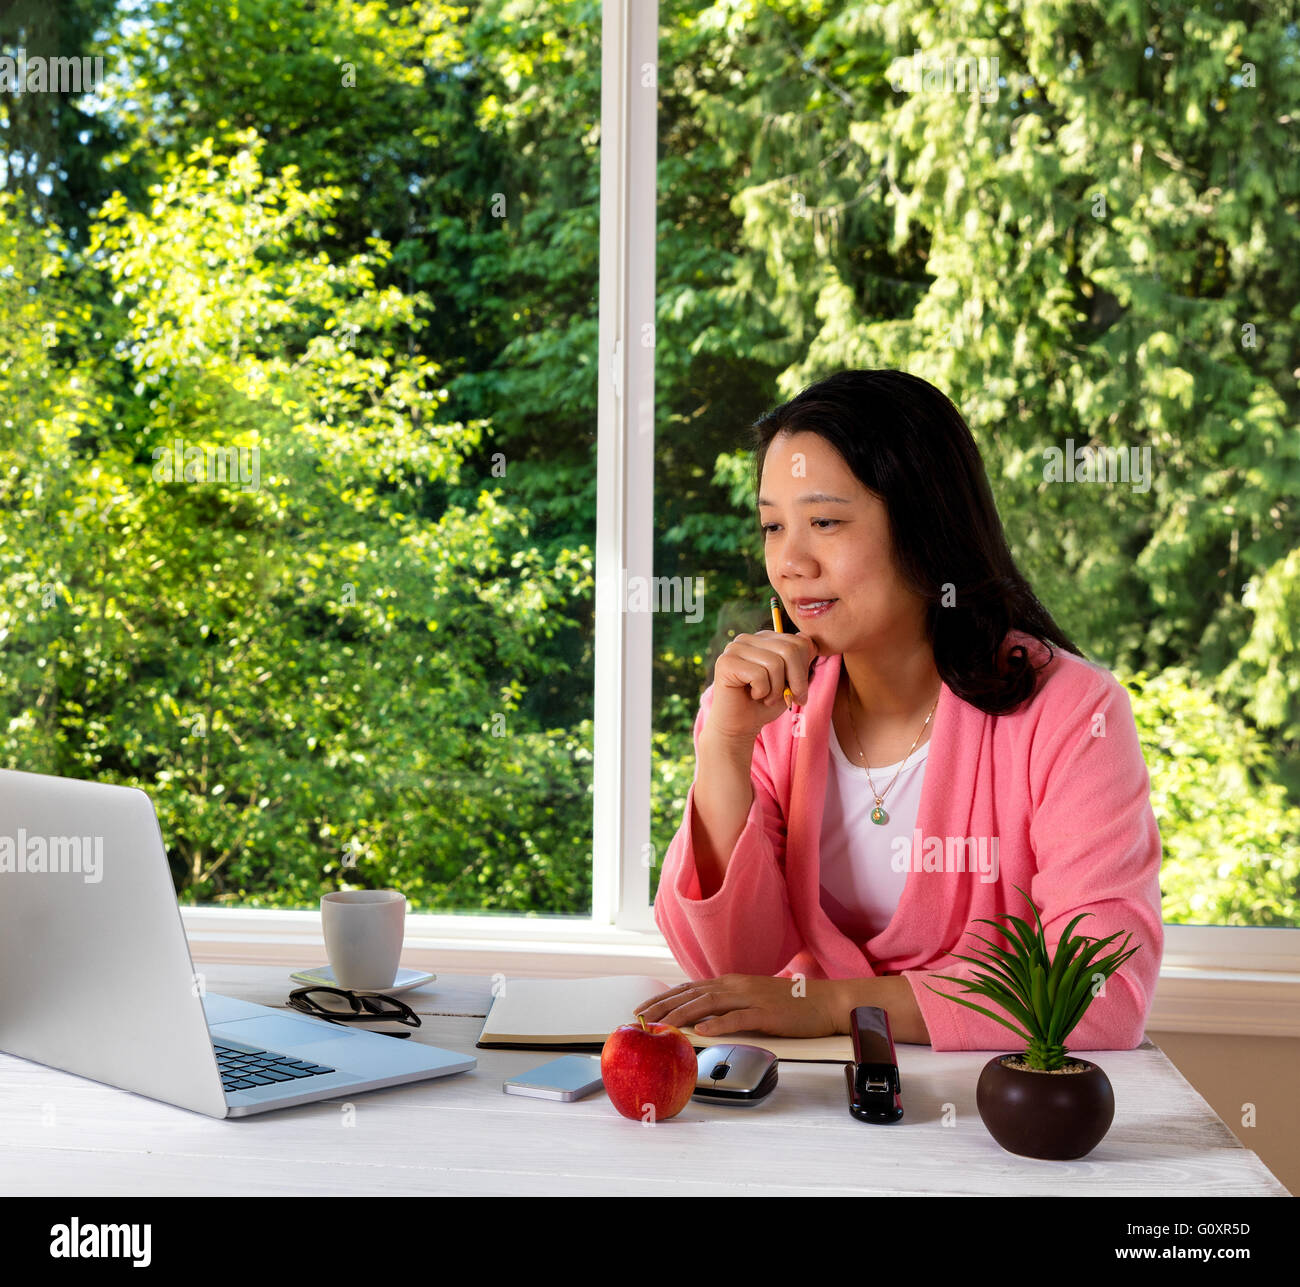 Mature woman, wearing pink bathrobe, working from home in front of large window with bright daylight and trees in background. Stock Photo